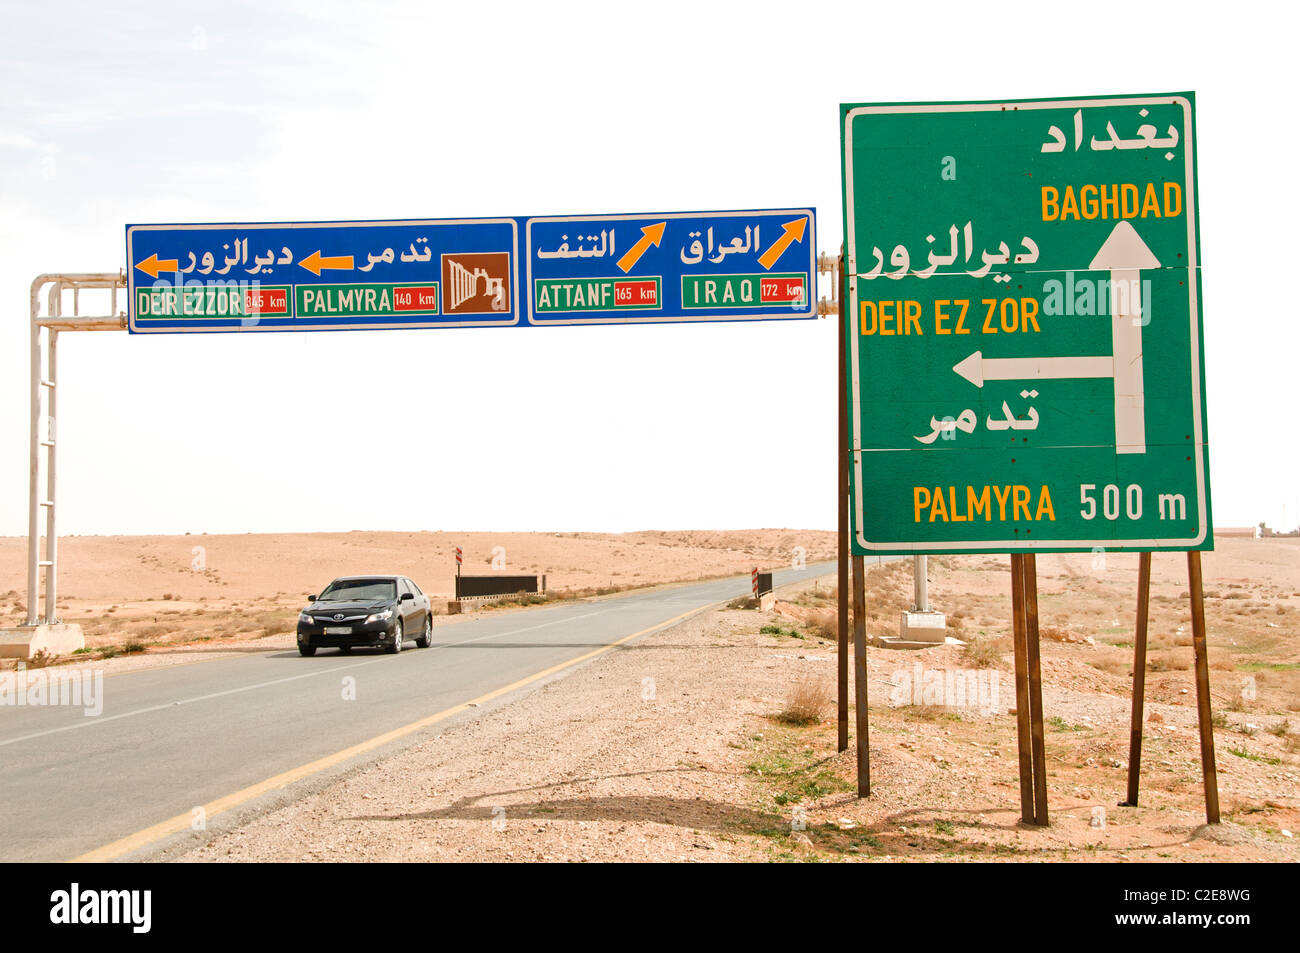 L'Iraq Syrie Damas Palmyre Road traffic Sign truck Banque D'Images